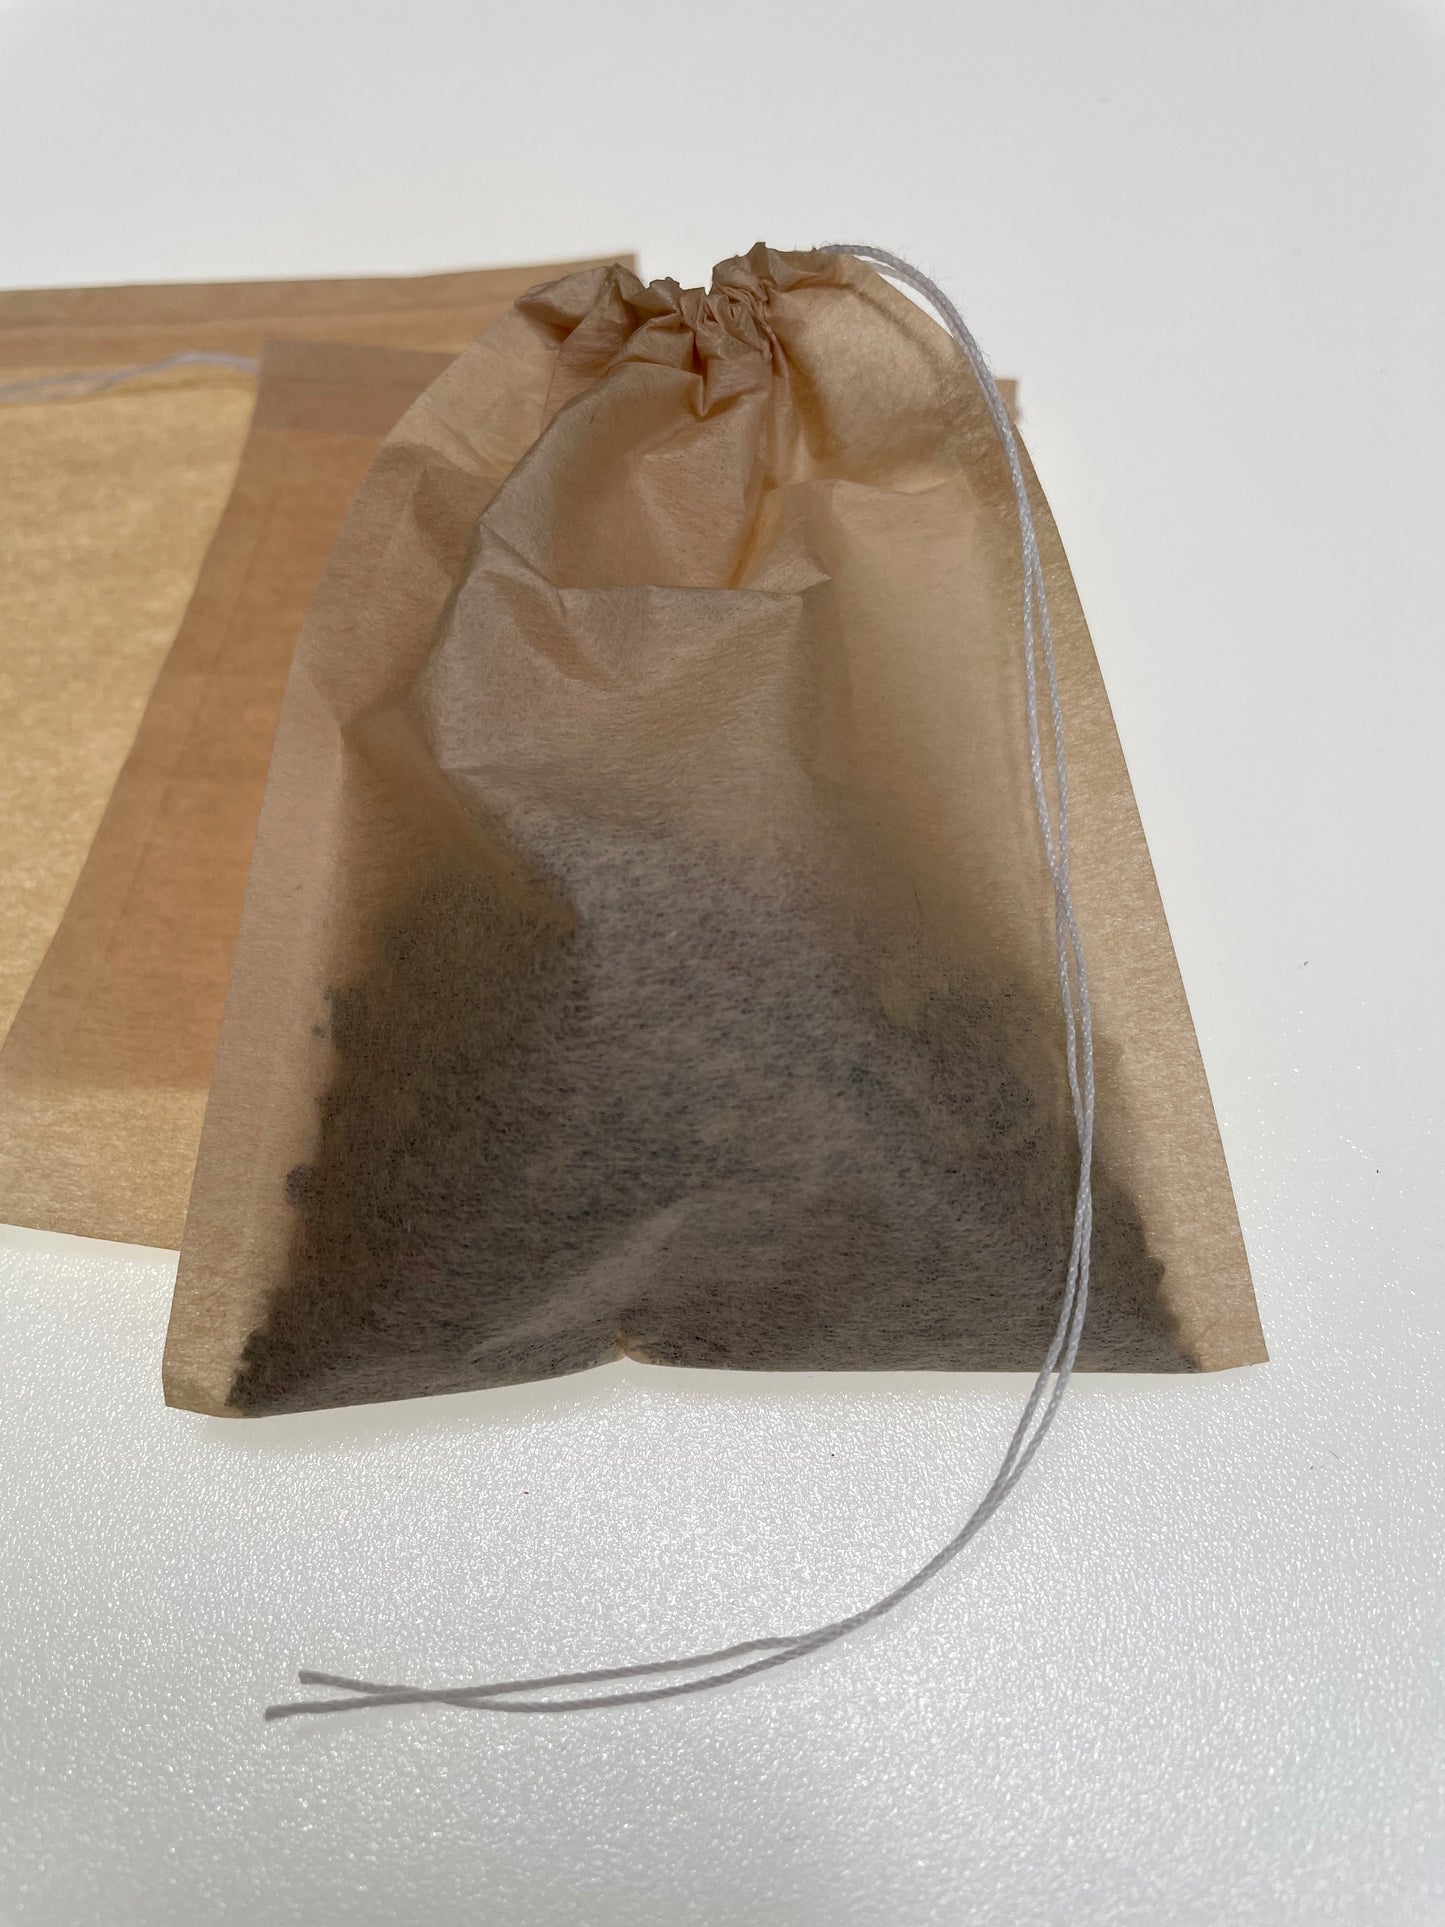 Witchy Pooh's Tea Bags for Loose Leaf Tea, 6 pack, Filtered, Disposable, Drawstring